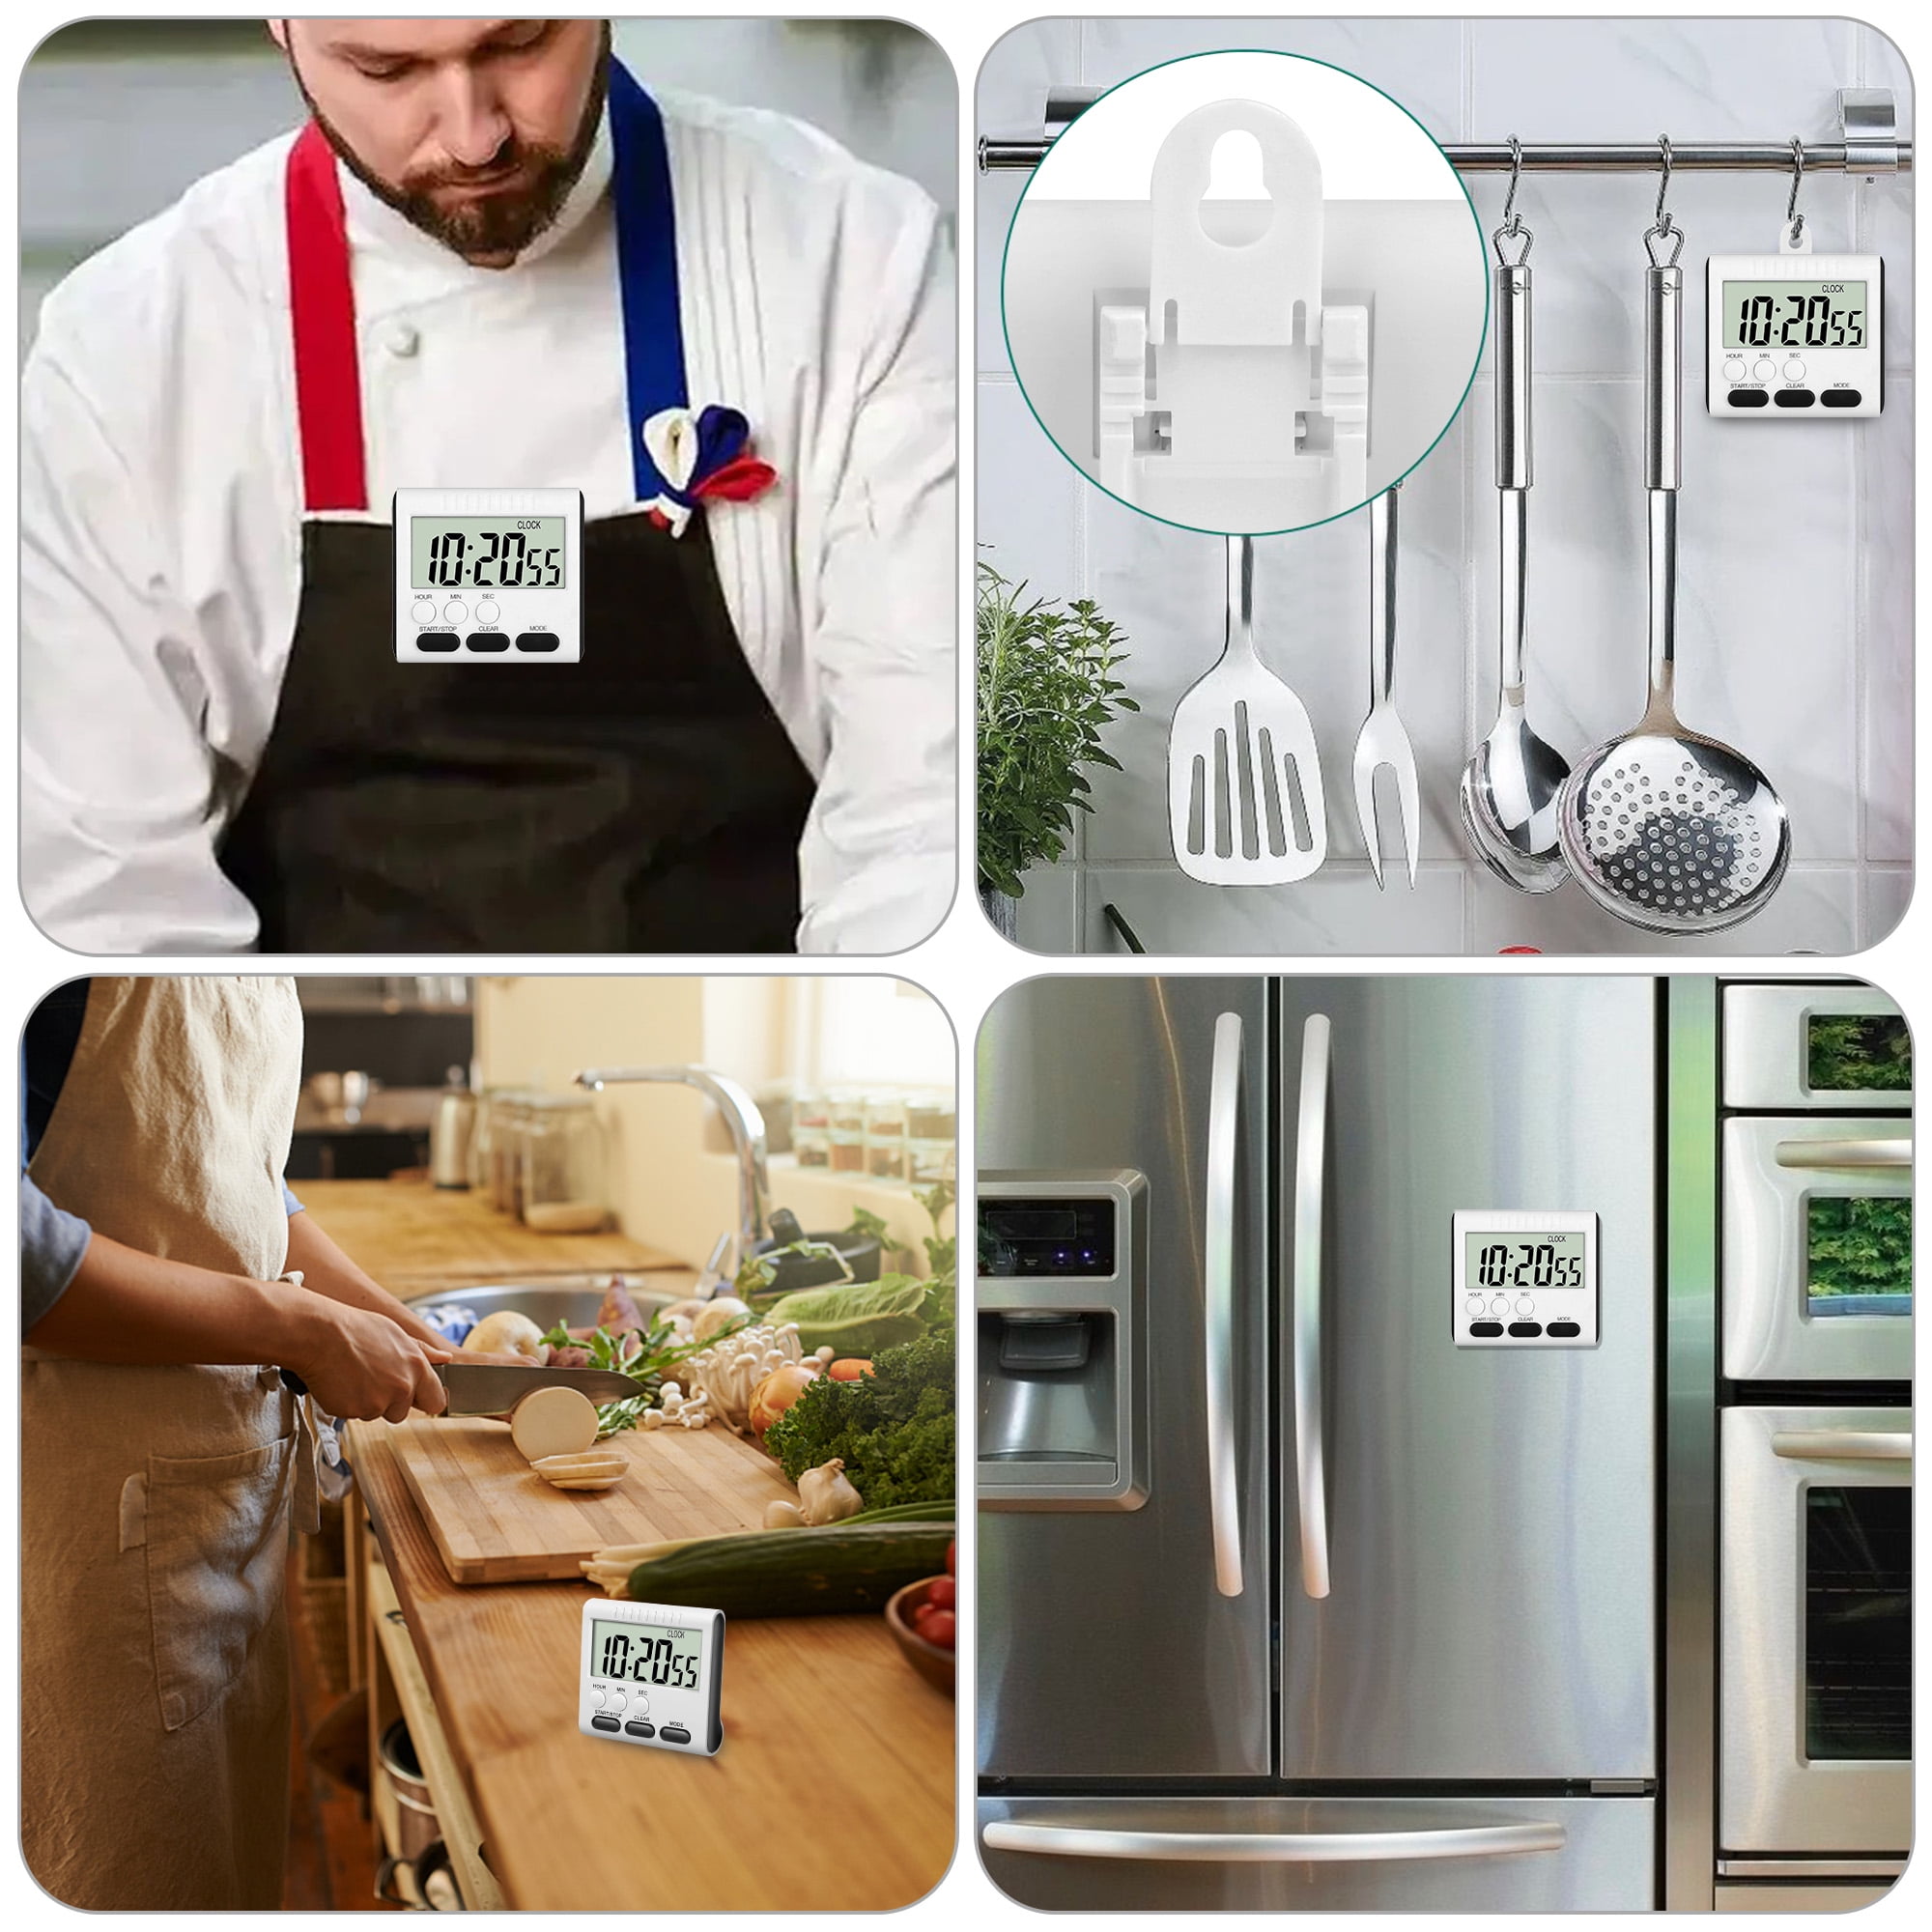 Digital Dual Kitchen Timer 3 Channels Count UP/Down Timer Cooking